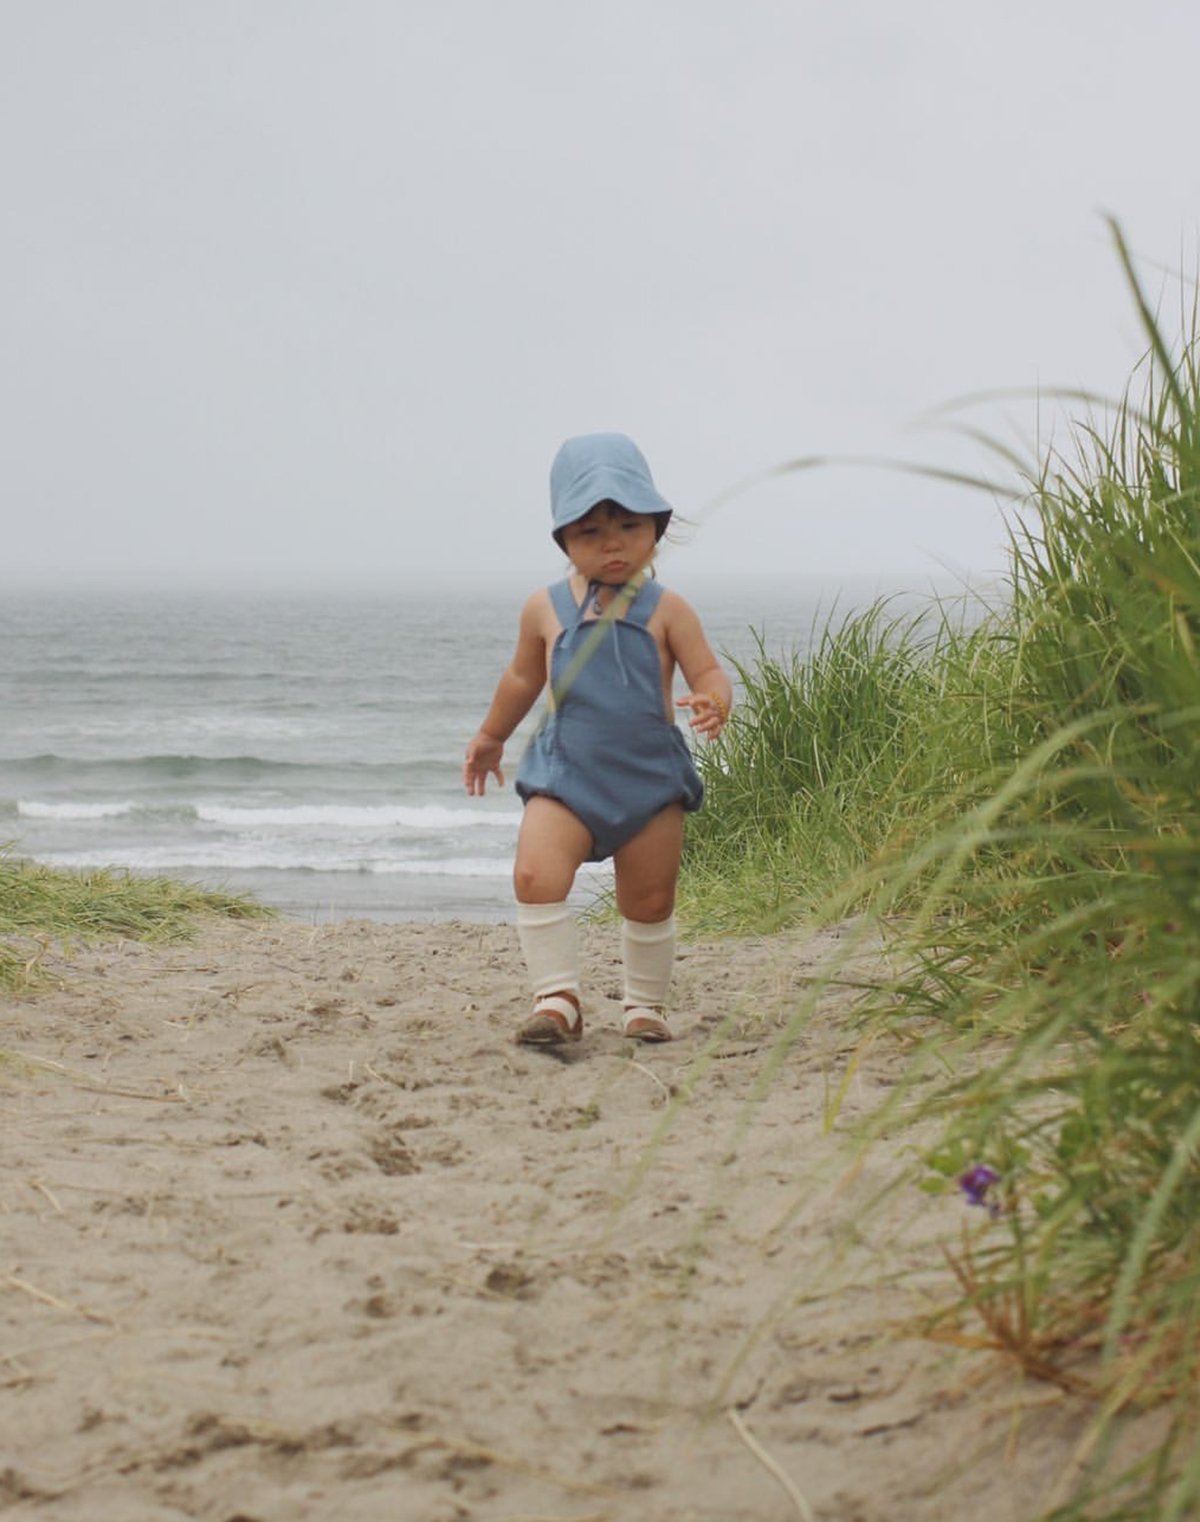 Baby walking on beach wearing a moon blue brimmed bonnet and sun suit with knee socks and sandals